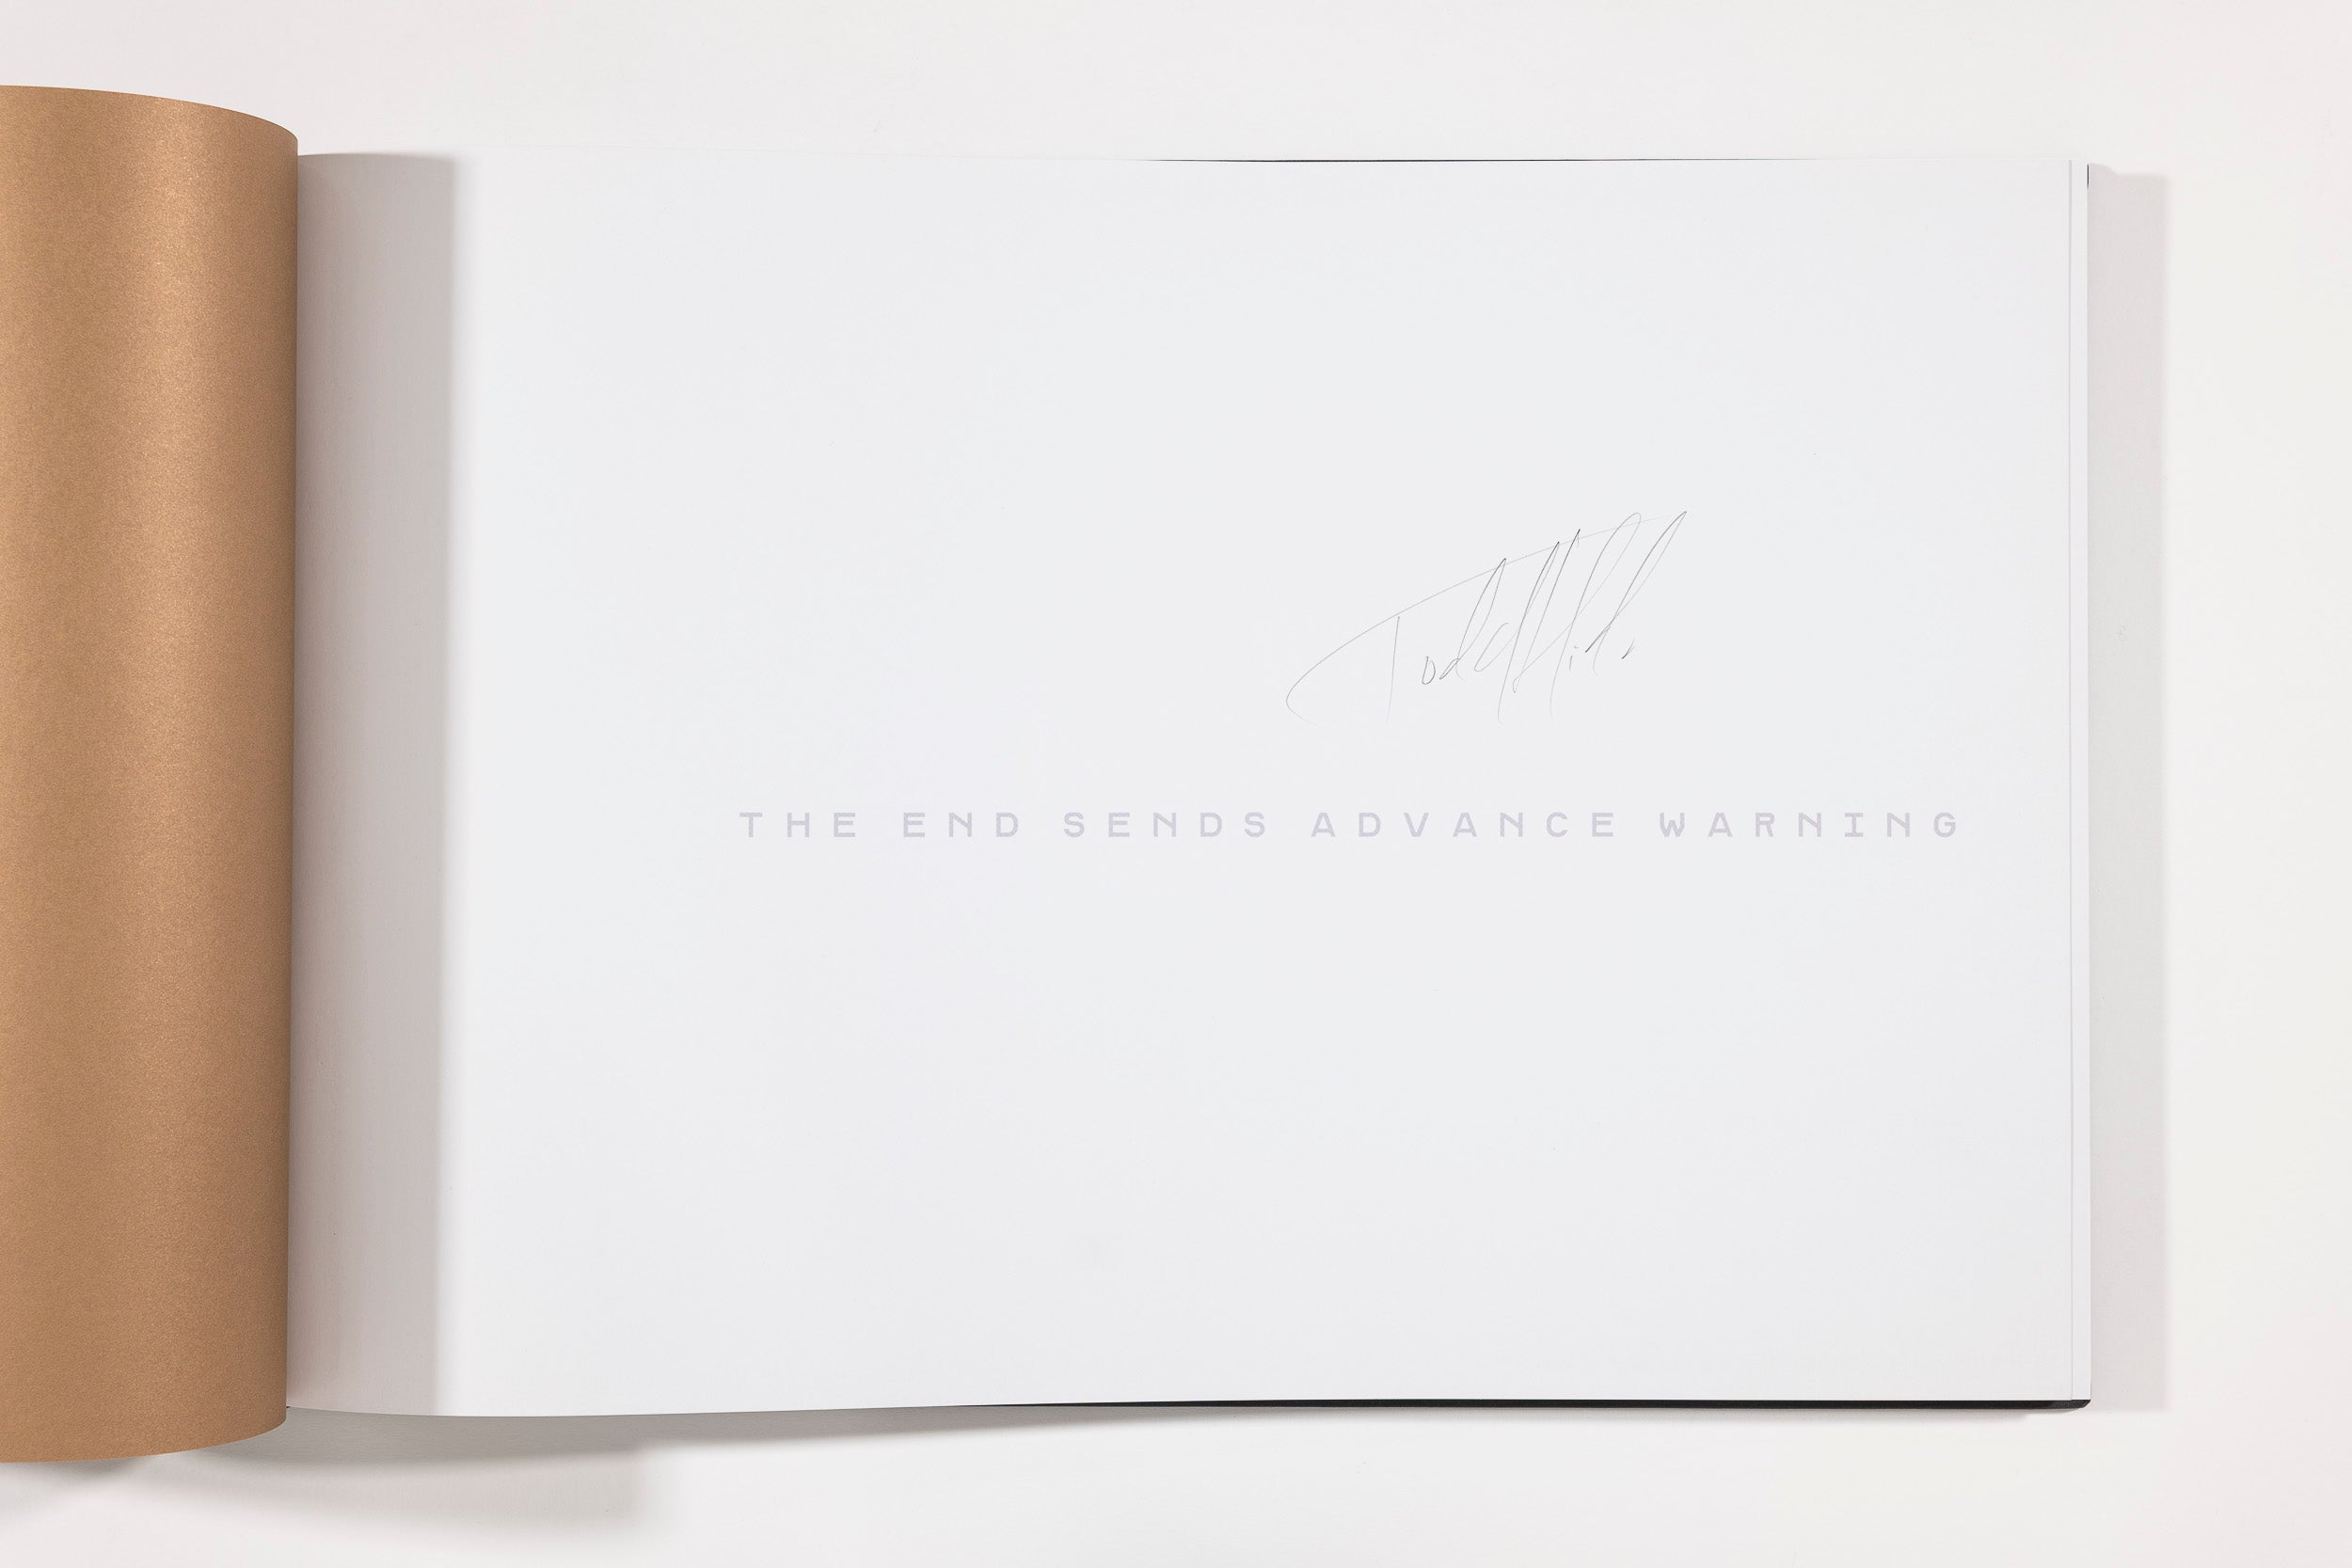 The End Sends Advance Warning - Todd Hido